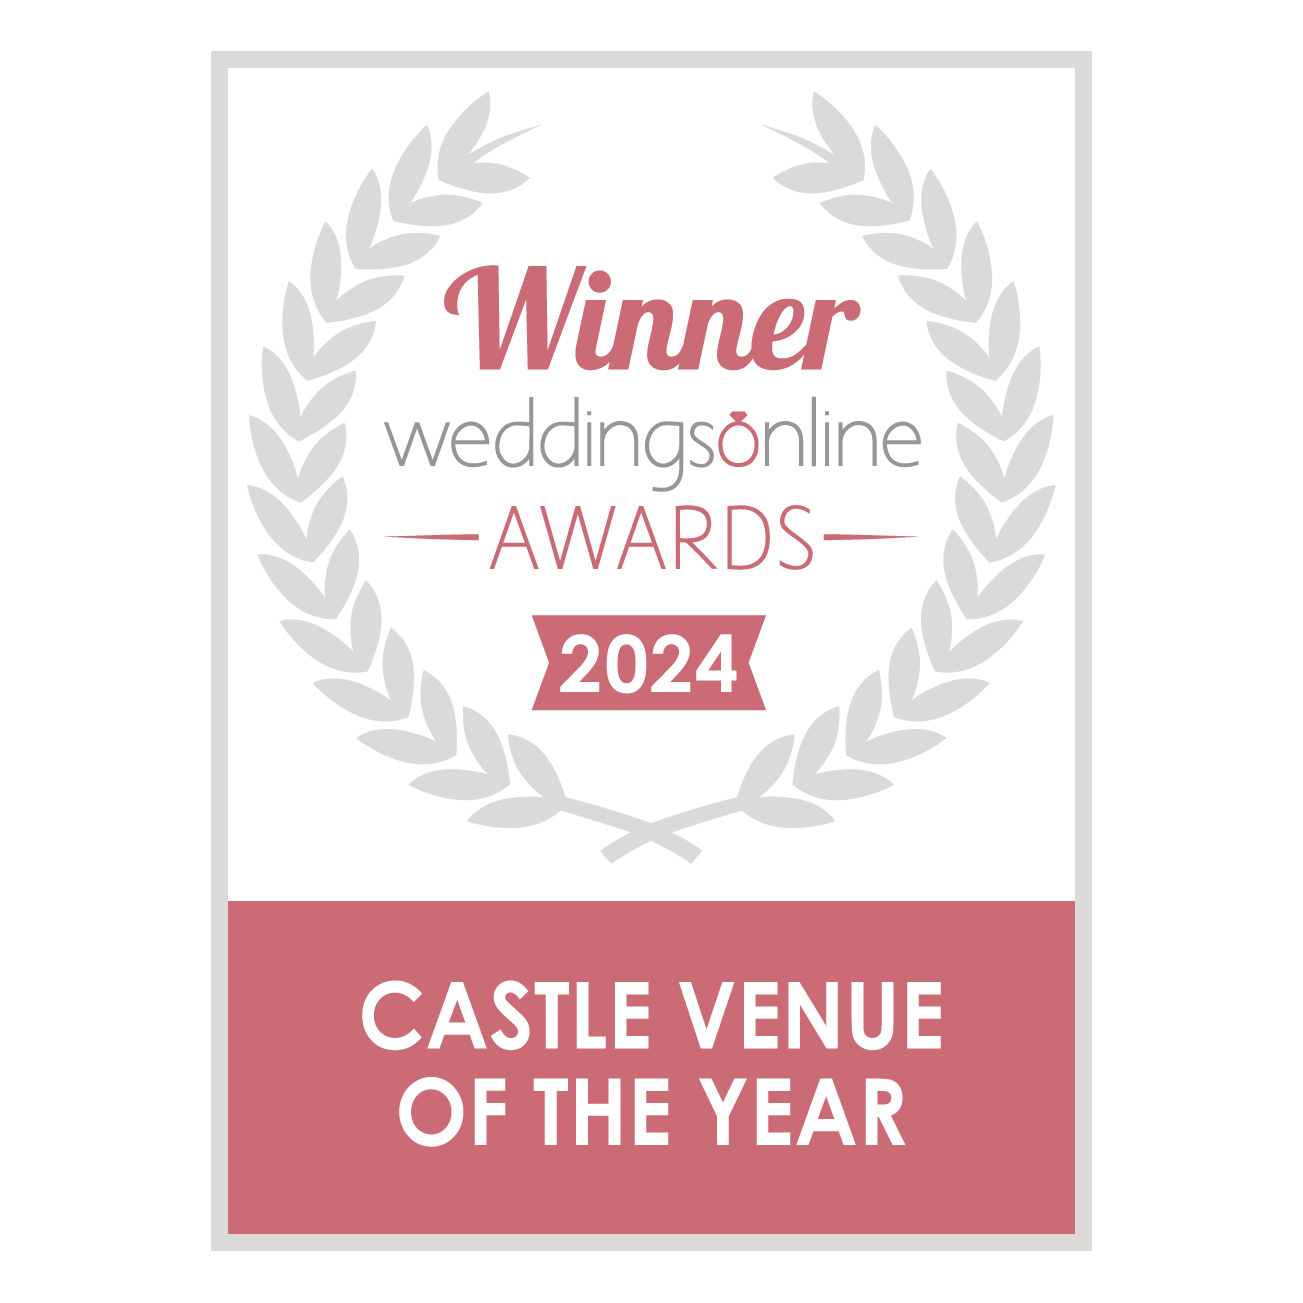 castle venue of the year